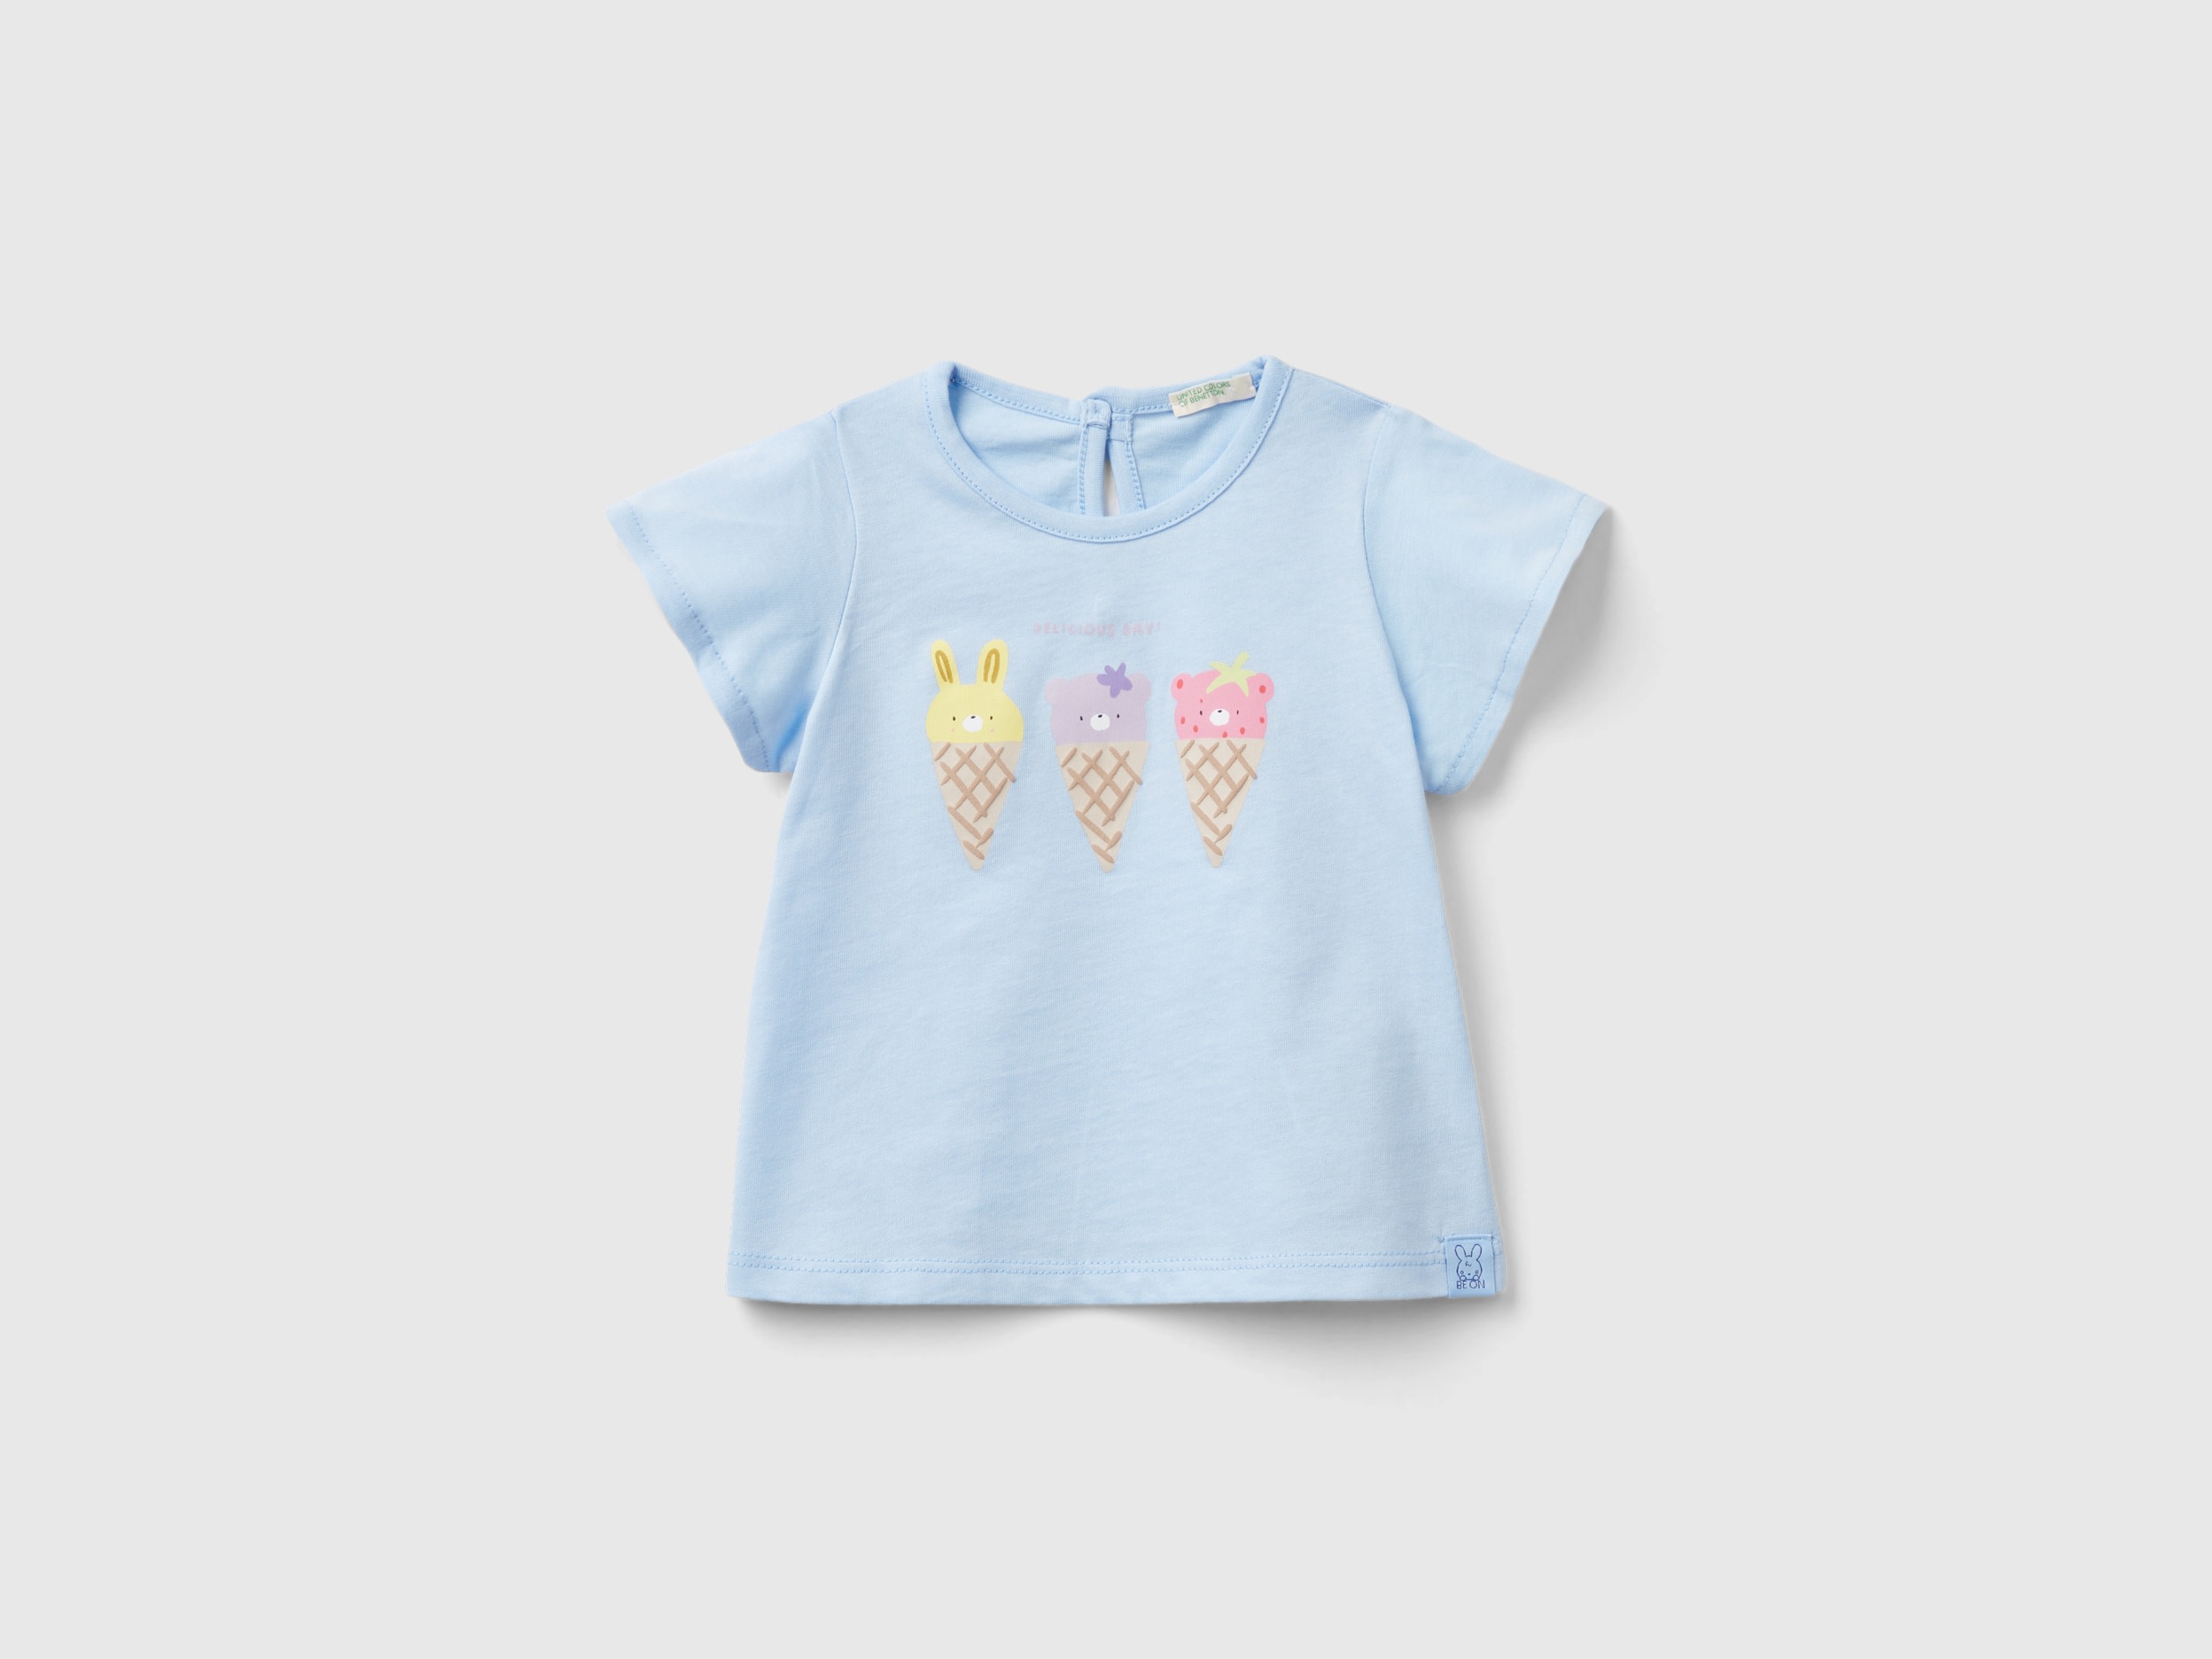 Image of Benetton, T-shirt In Pure Organic Cotton, size 62, Sky Blue, Kids